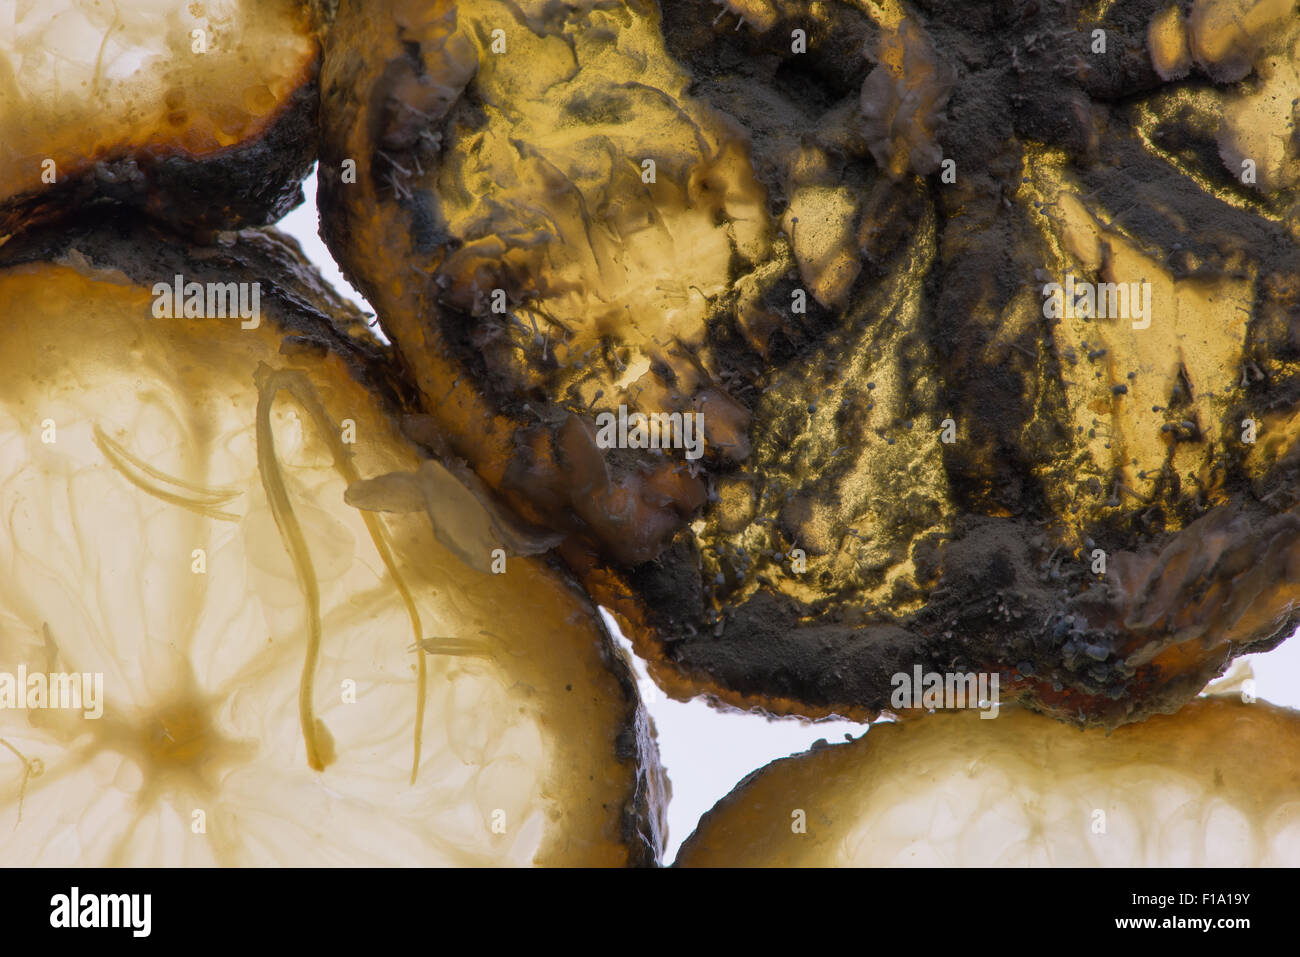 lemon fruit section slice slices isolated against bright white background showing signs of decay fungi hyphae penicillin Stock Photo